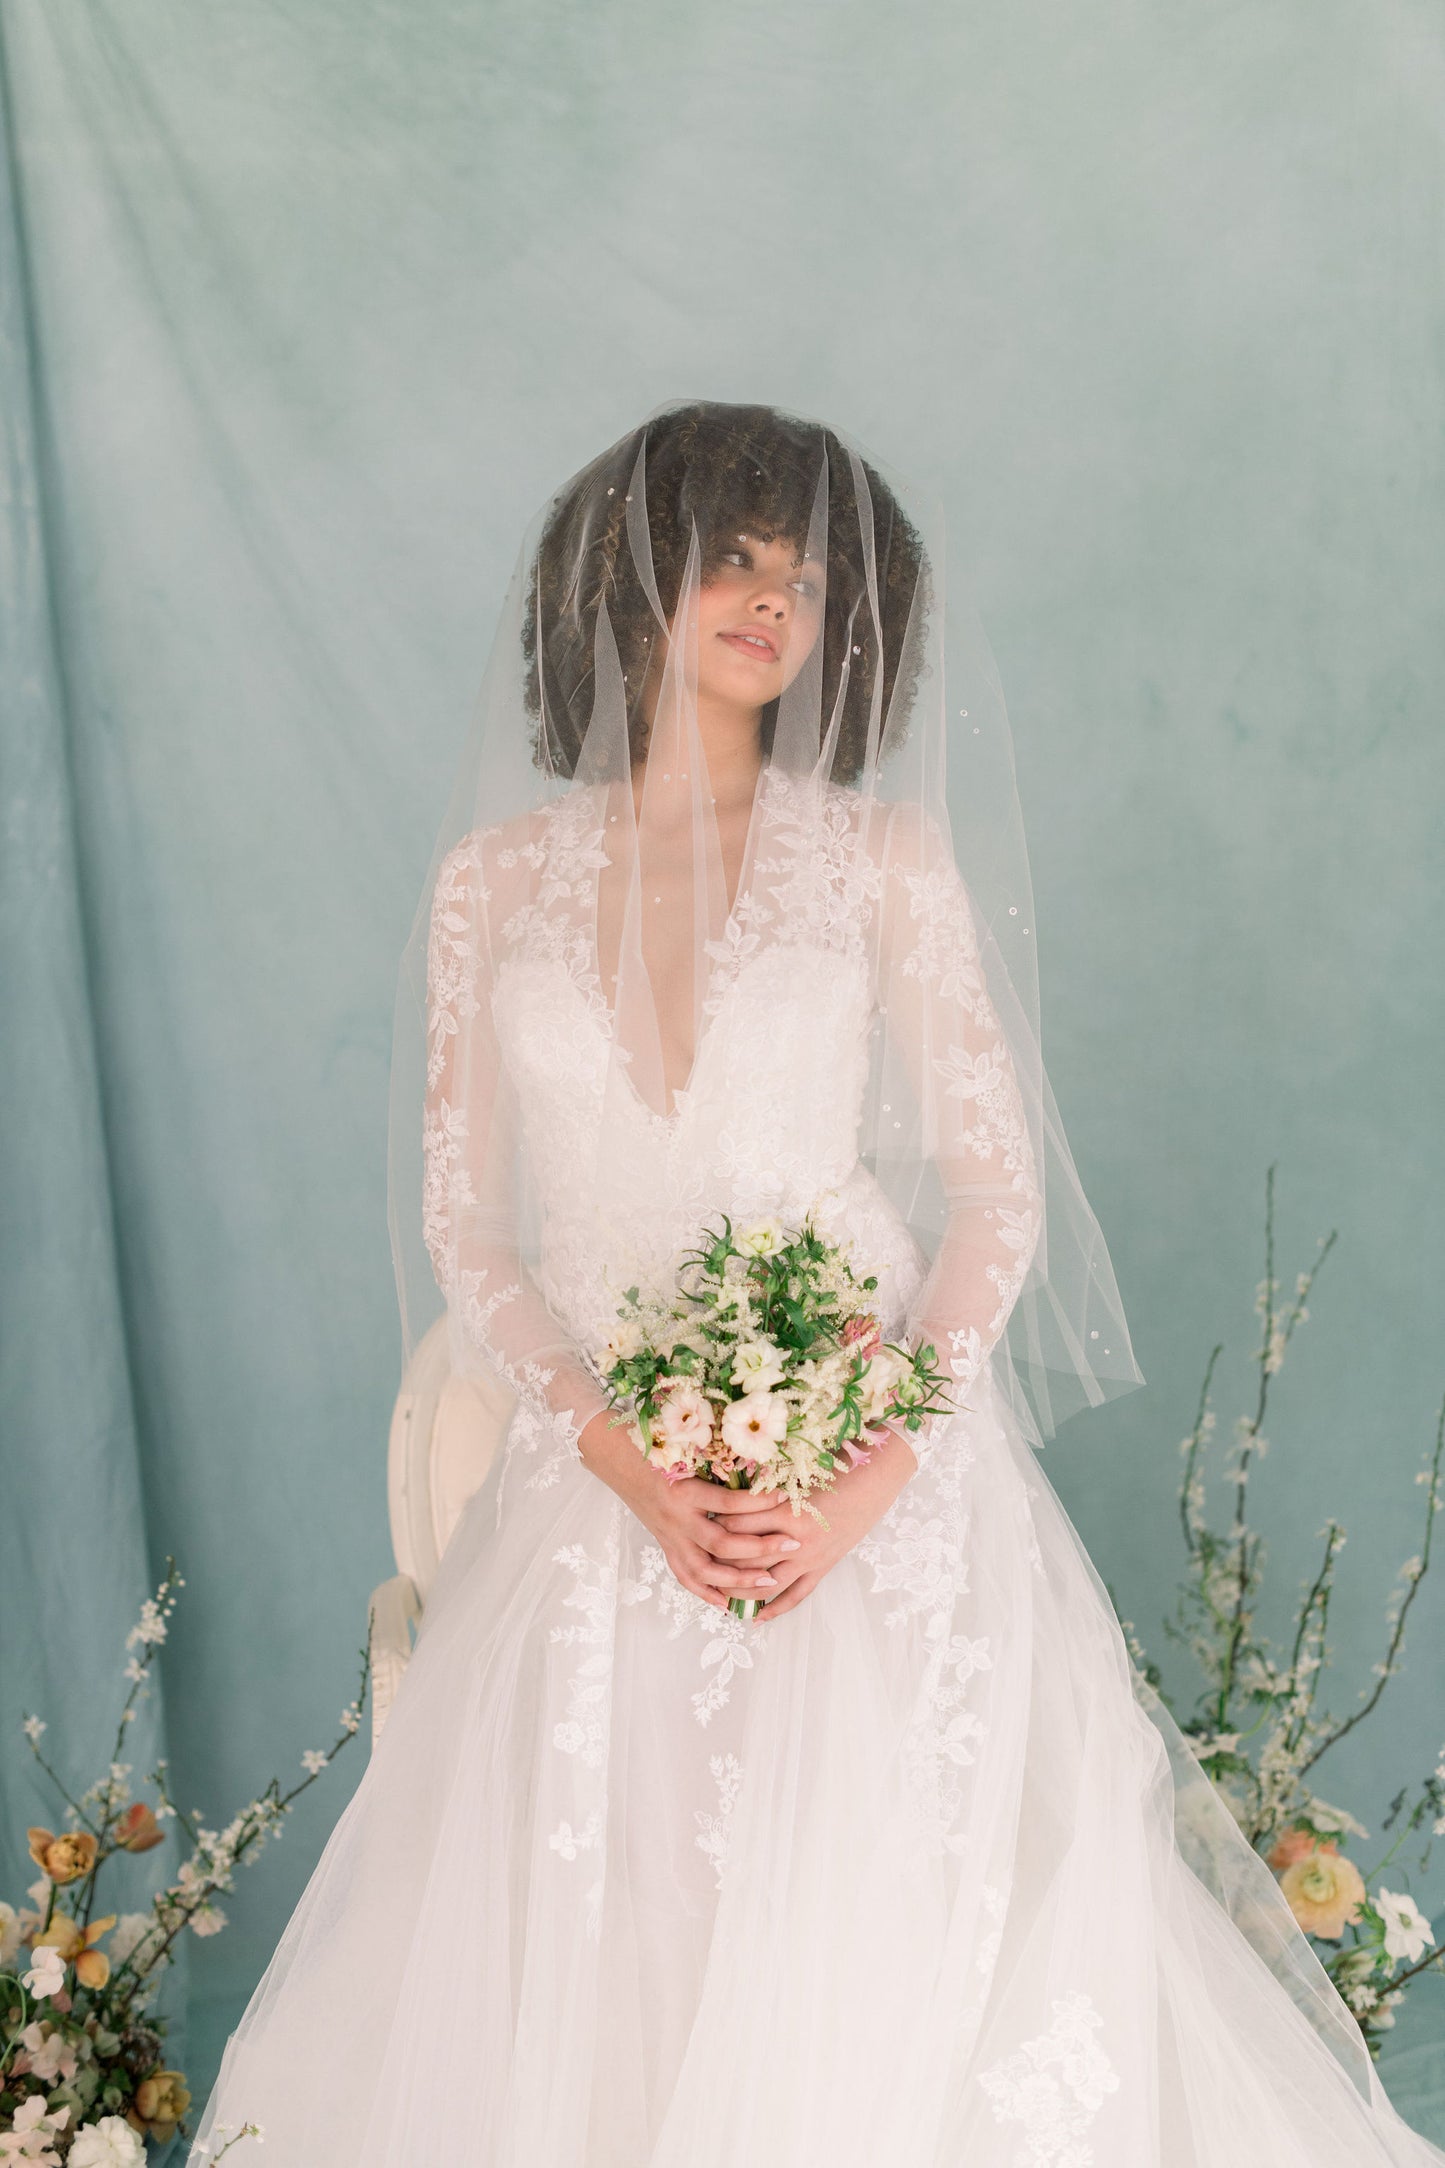 Drop bridal veil with clustered dew drops throughout - Ready to ship